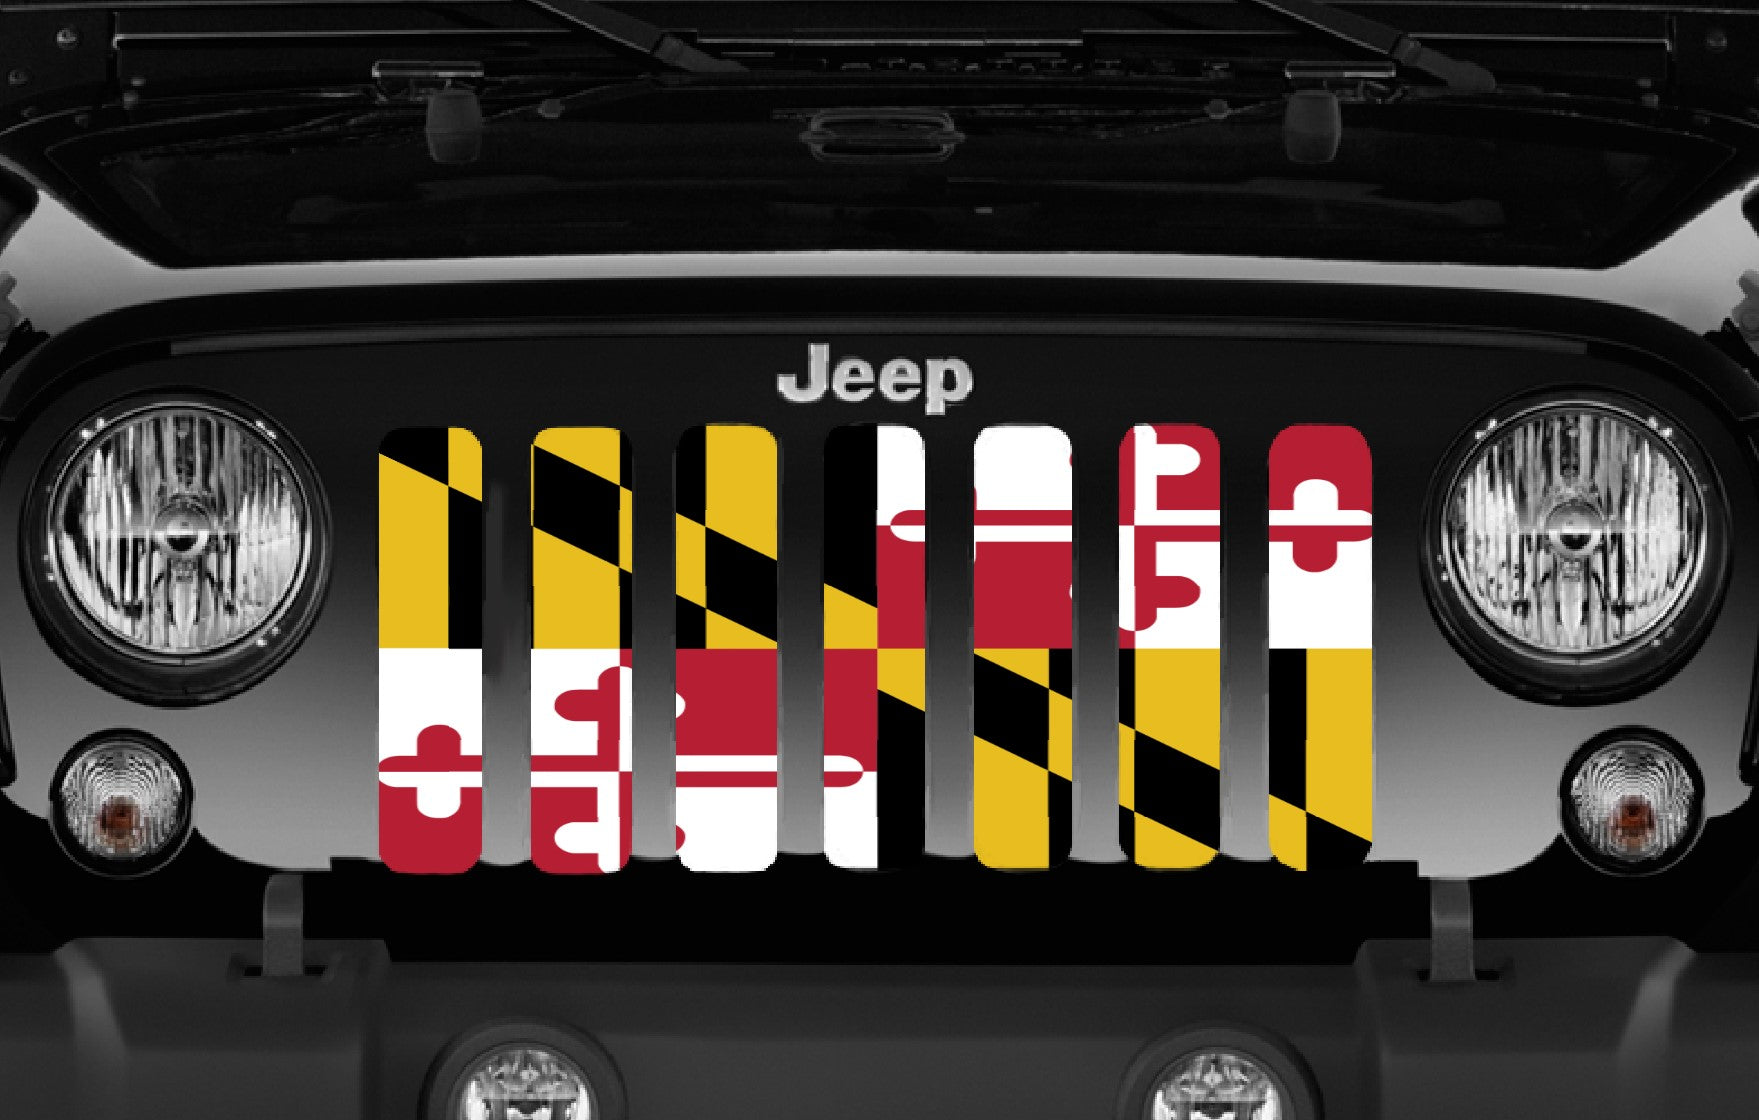 Jeep Wrangler Maryland Flag Grille Insert | Dirty Acres